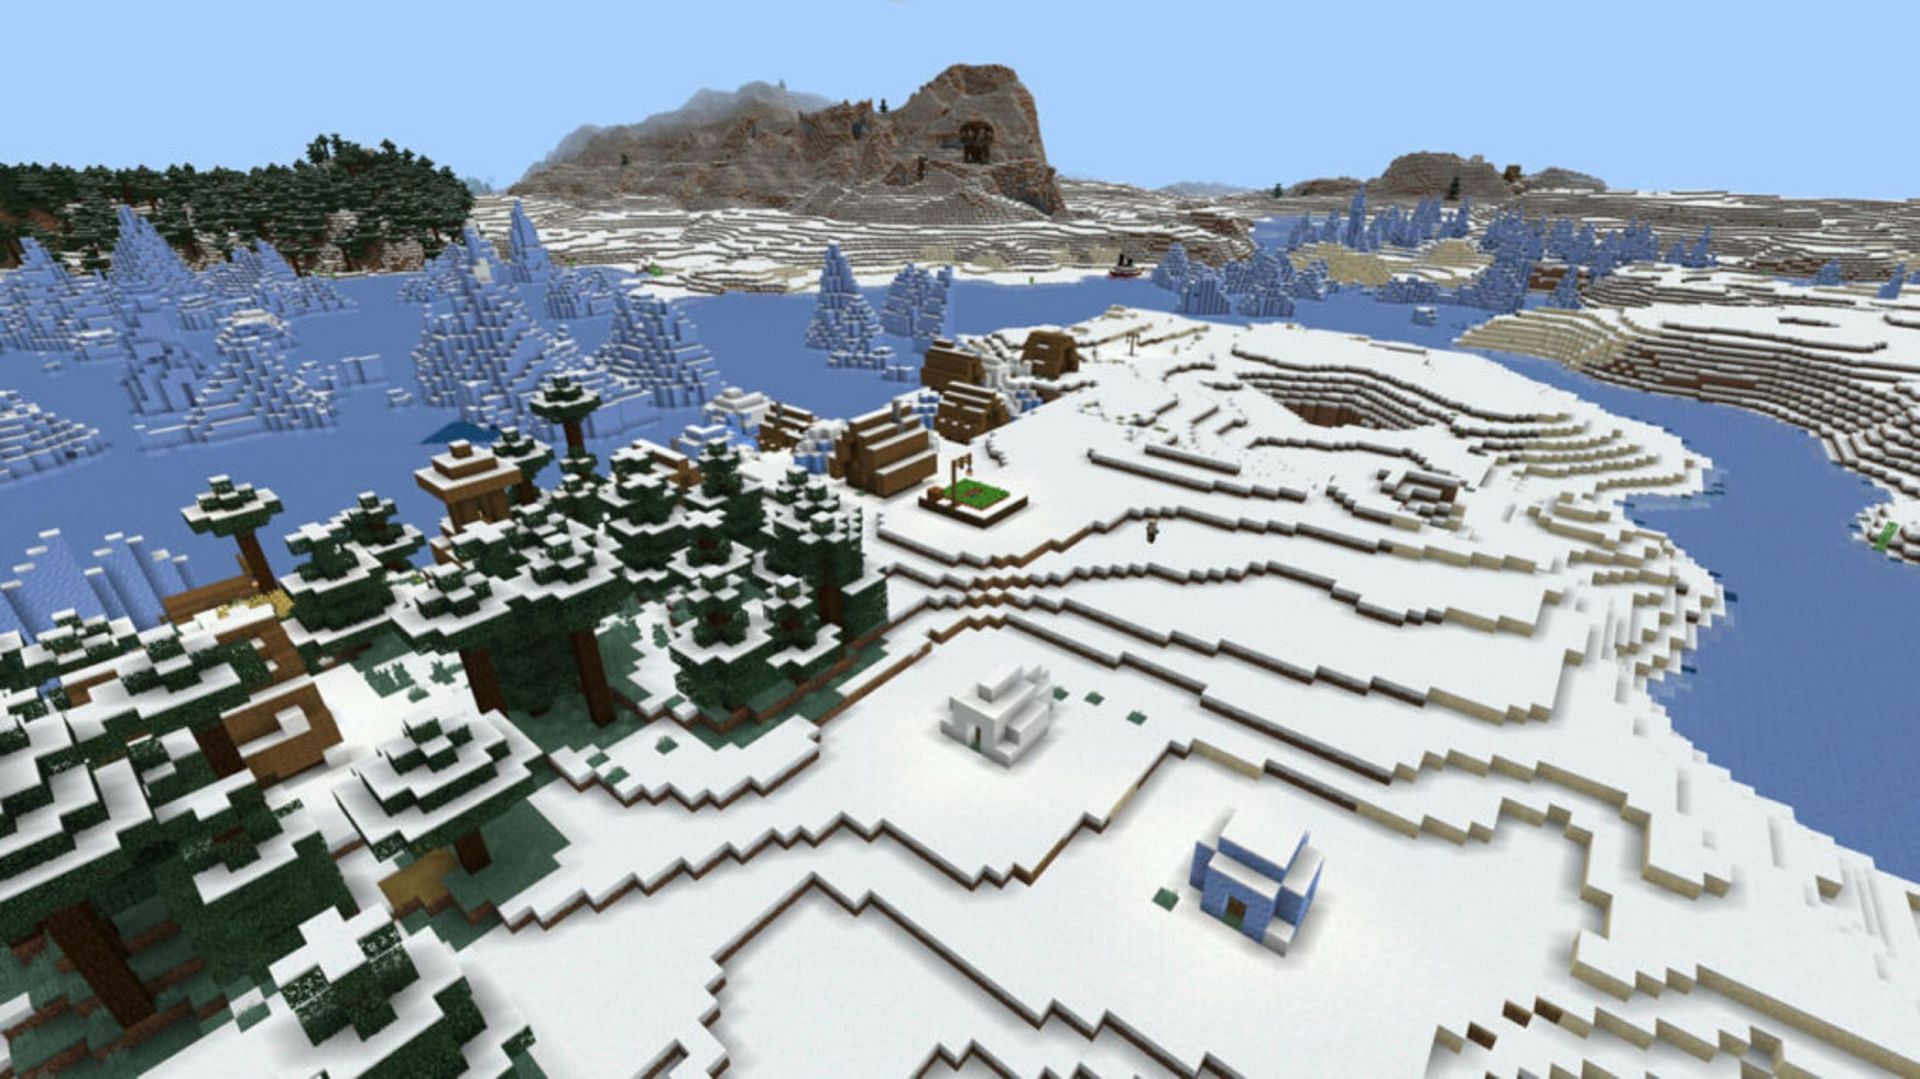 A frigid biome awaits players in this seed, but plenty of loot as well (Image via Skeyers/Youtube)